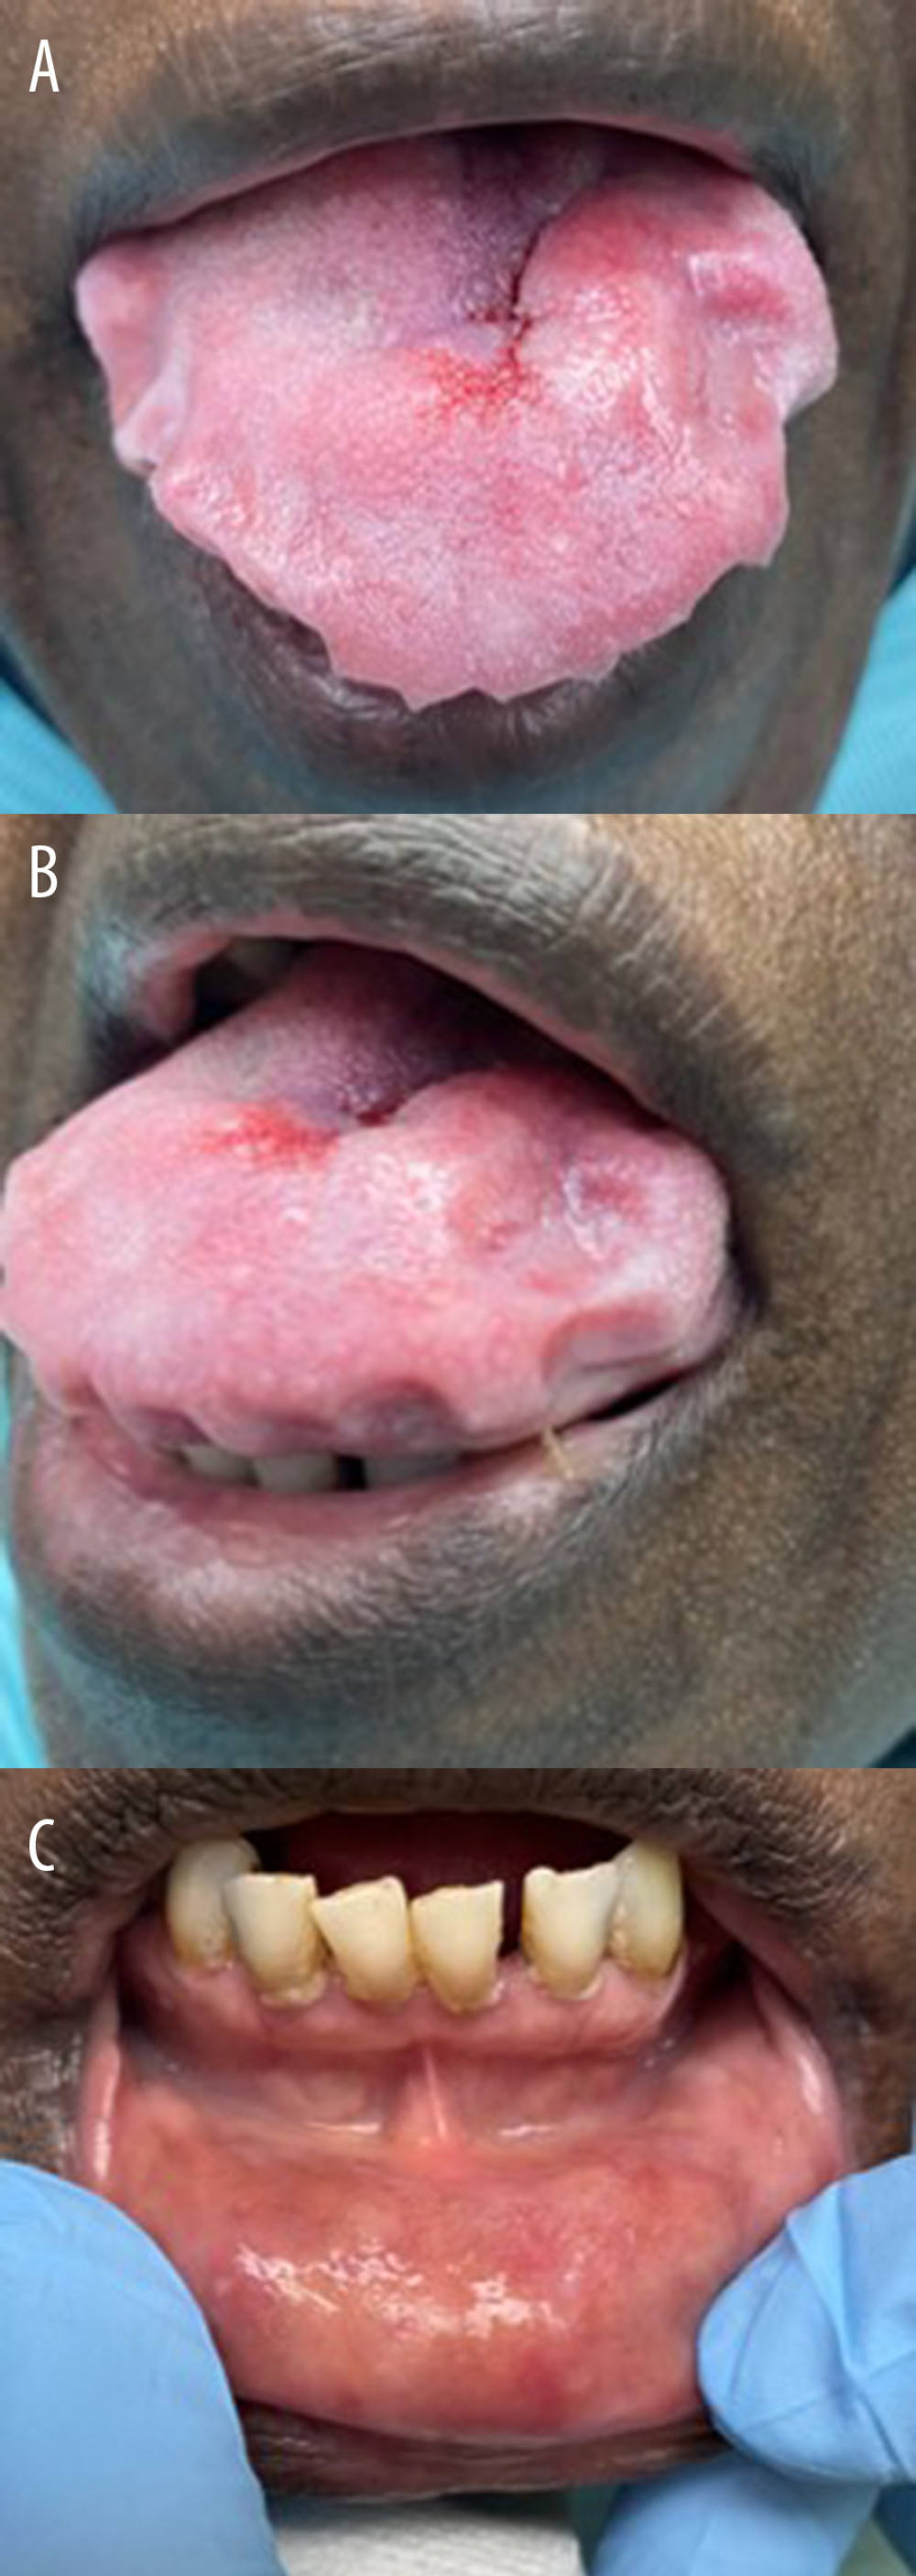 American Journal of Case Reports | A 65-Year-Old Woman with an 